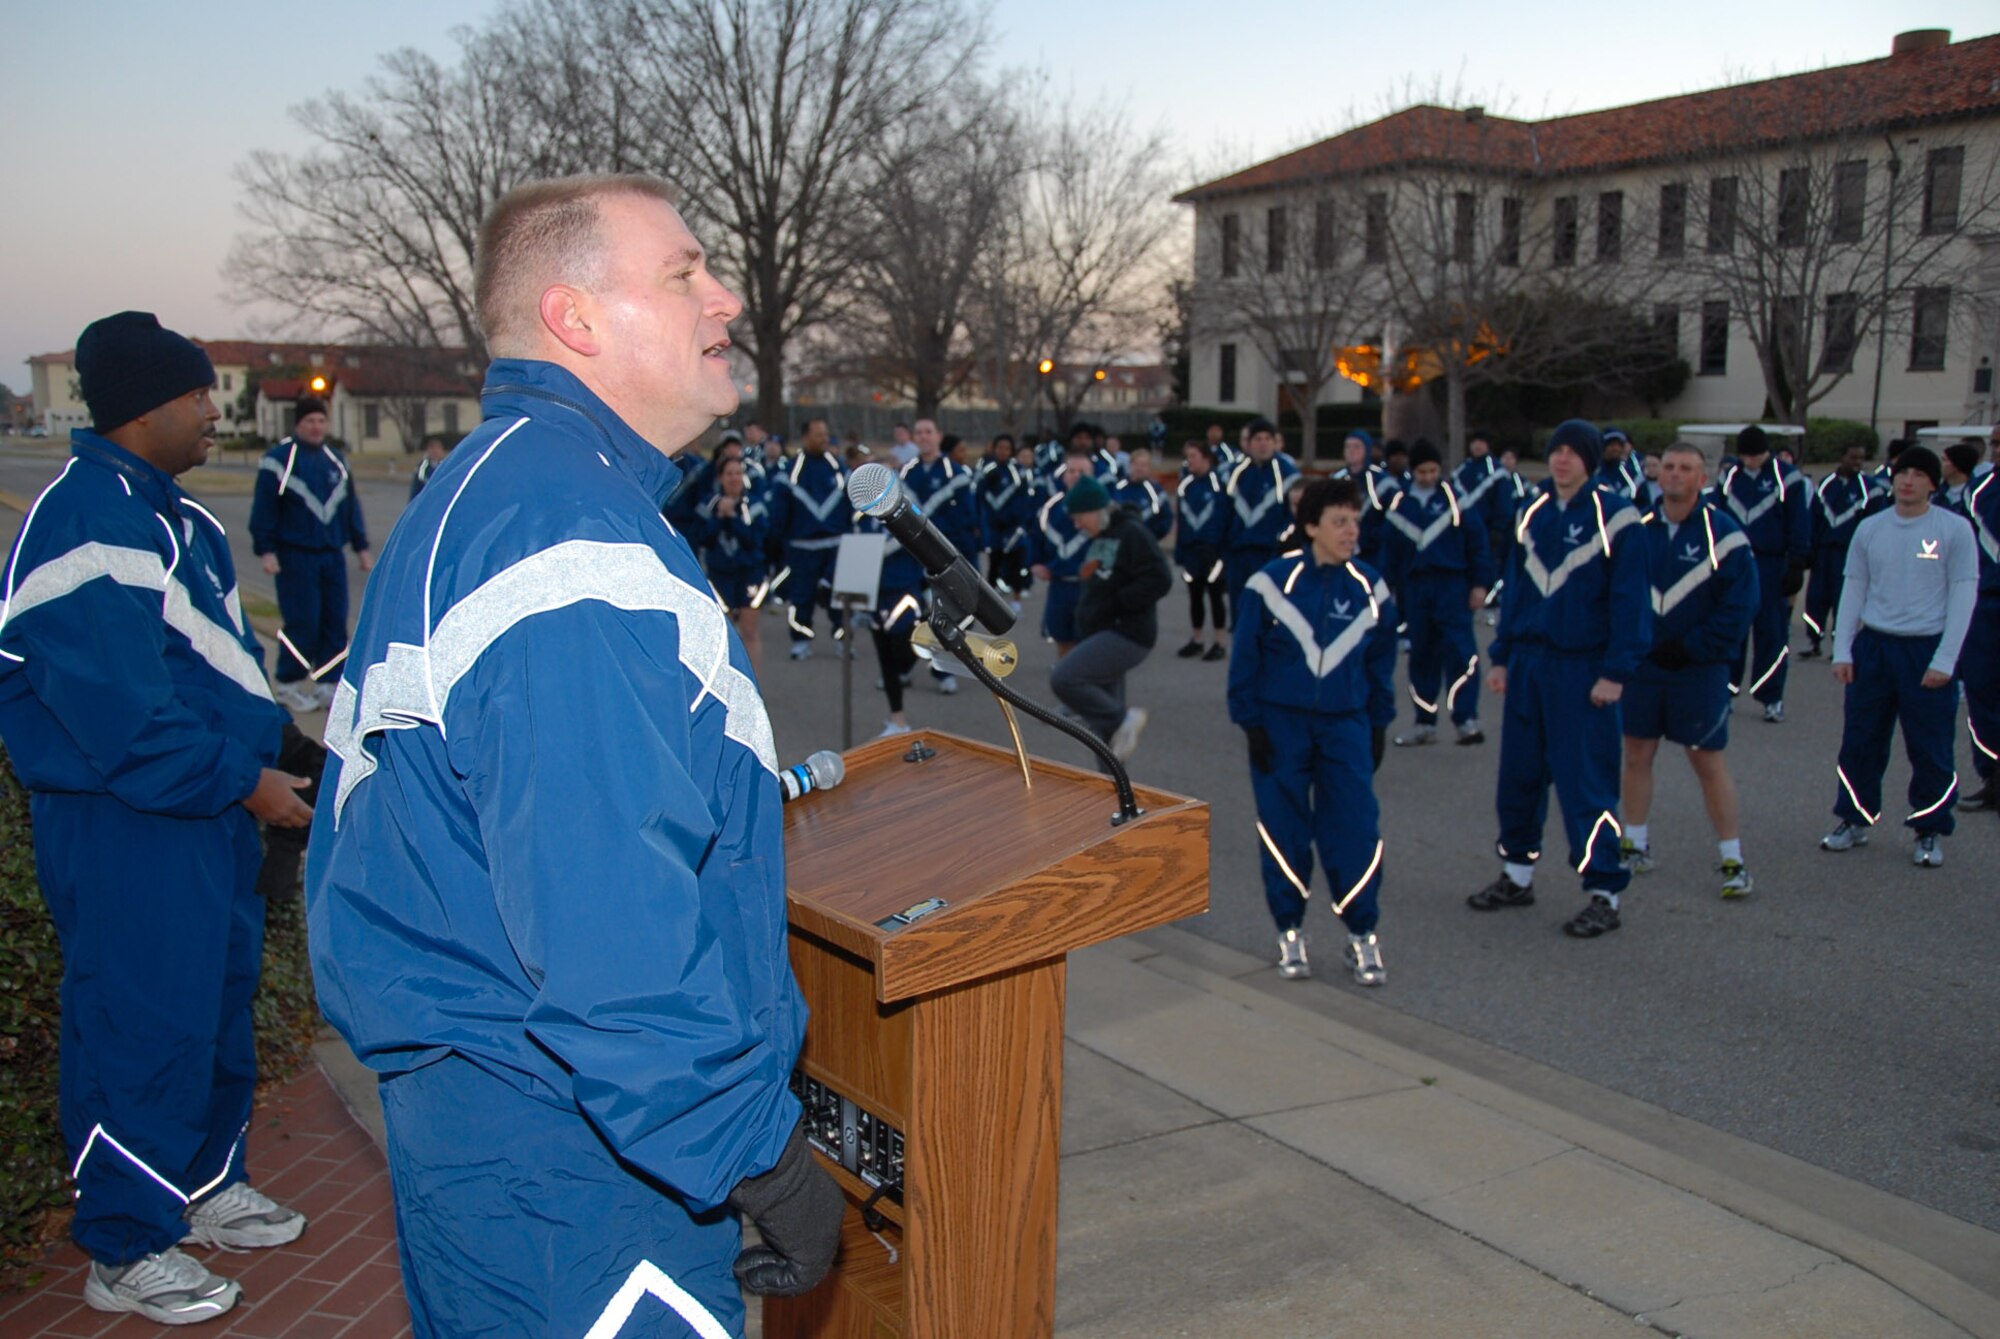 Col. Kris D. Beasley, commander of the 42nd Air Base Wing, greets wing members as they prepare for the Jan. 30 fun run. The run began and ended at the “prop and wings” monument in front of building 800. Temperatures were as low as 26 degrees as the runners began their 5K journey through the base. (Air Force photo by Jamie Pitcher)